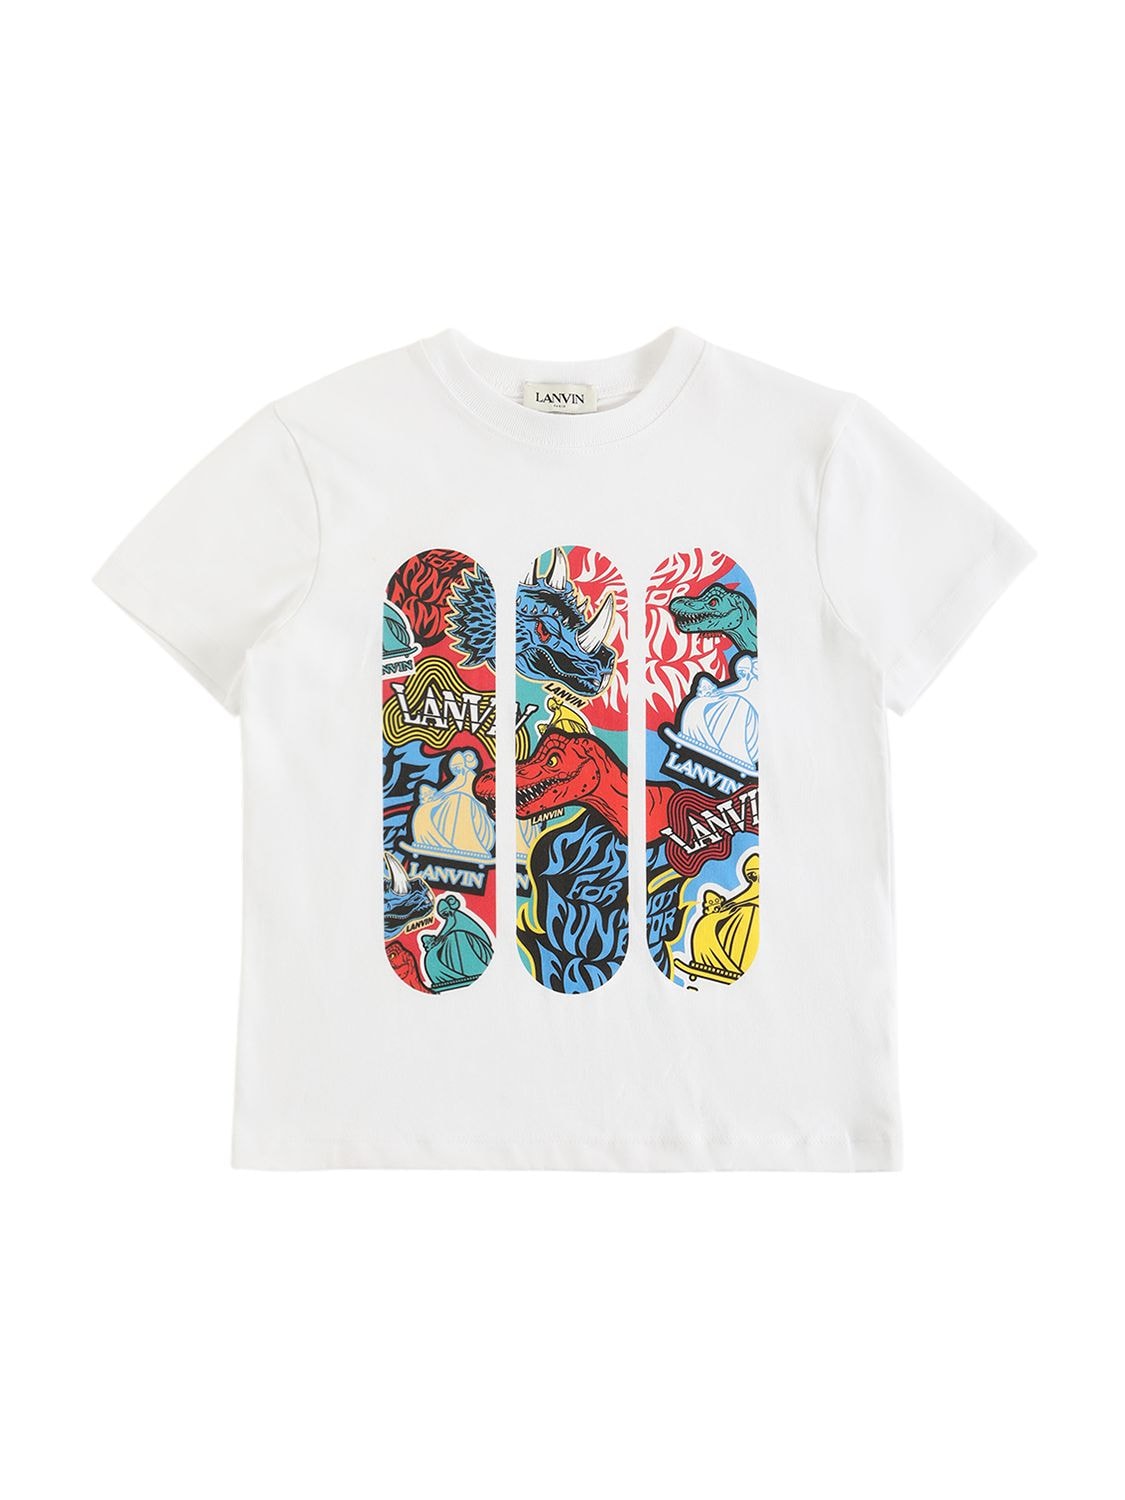 Lanvin Kids' Printed Cotton Jersey S/s T-shirt In White